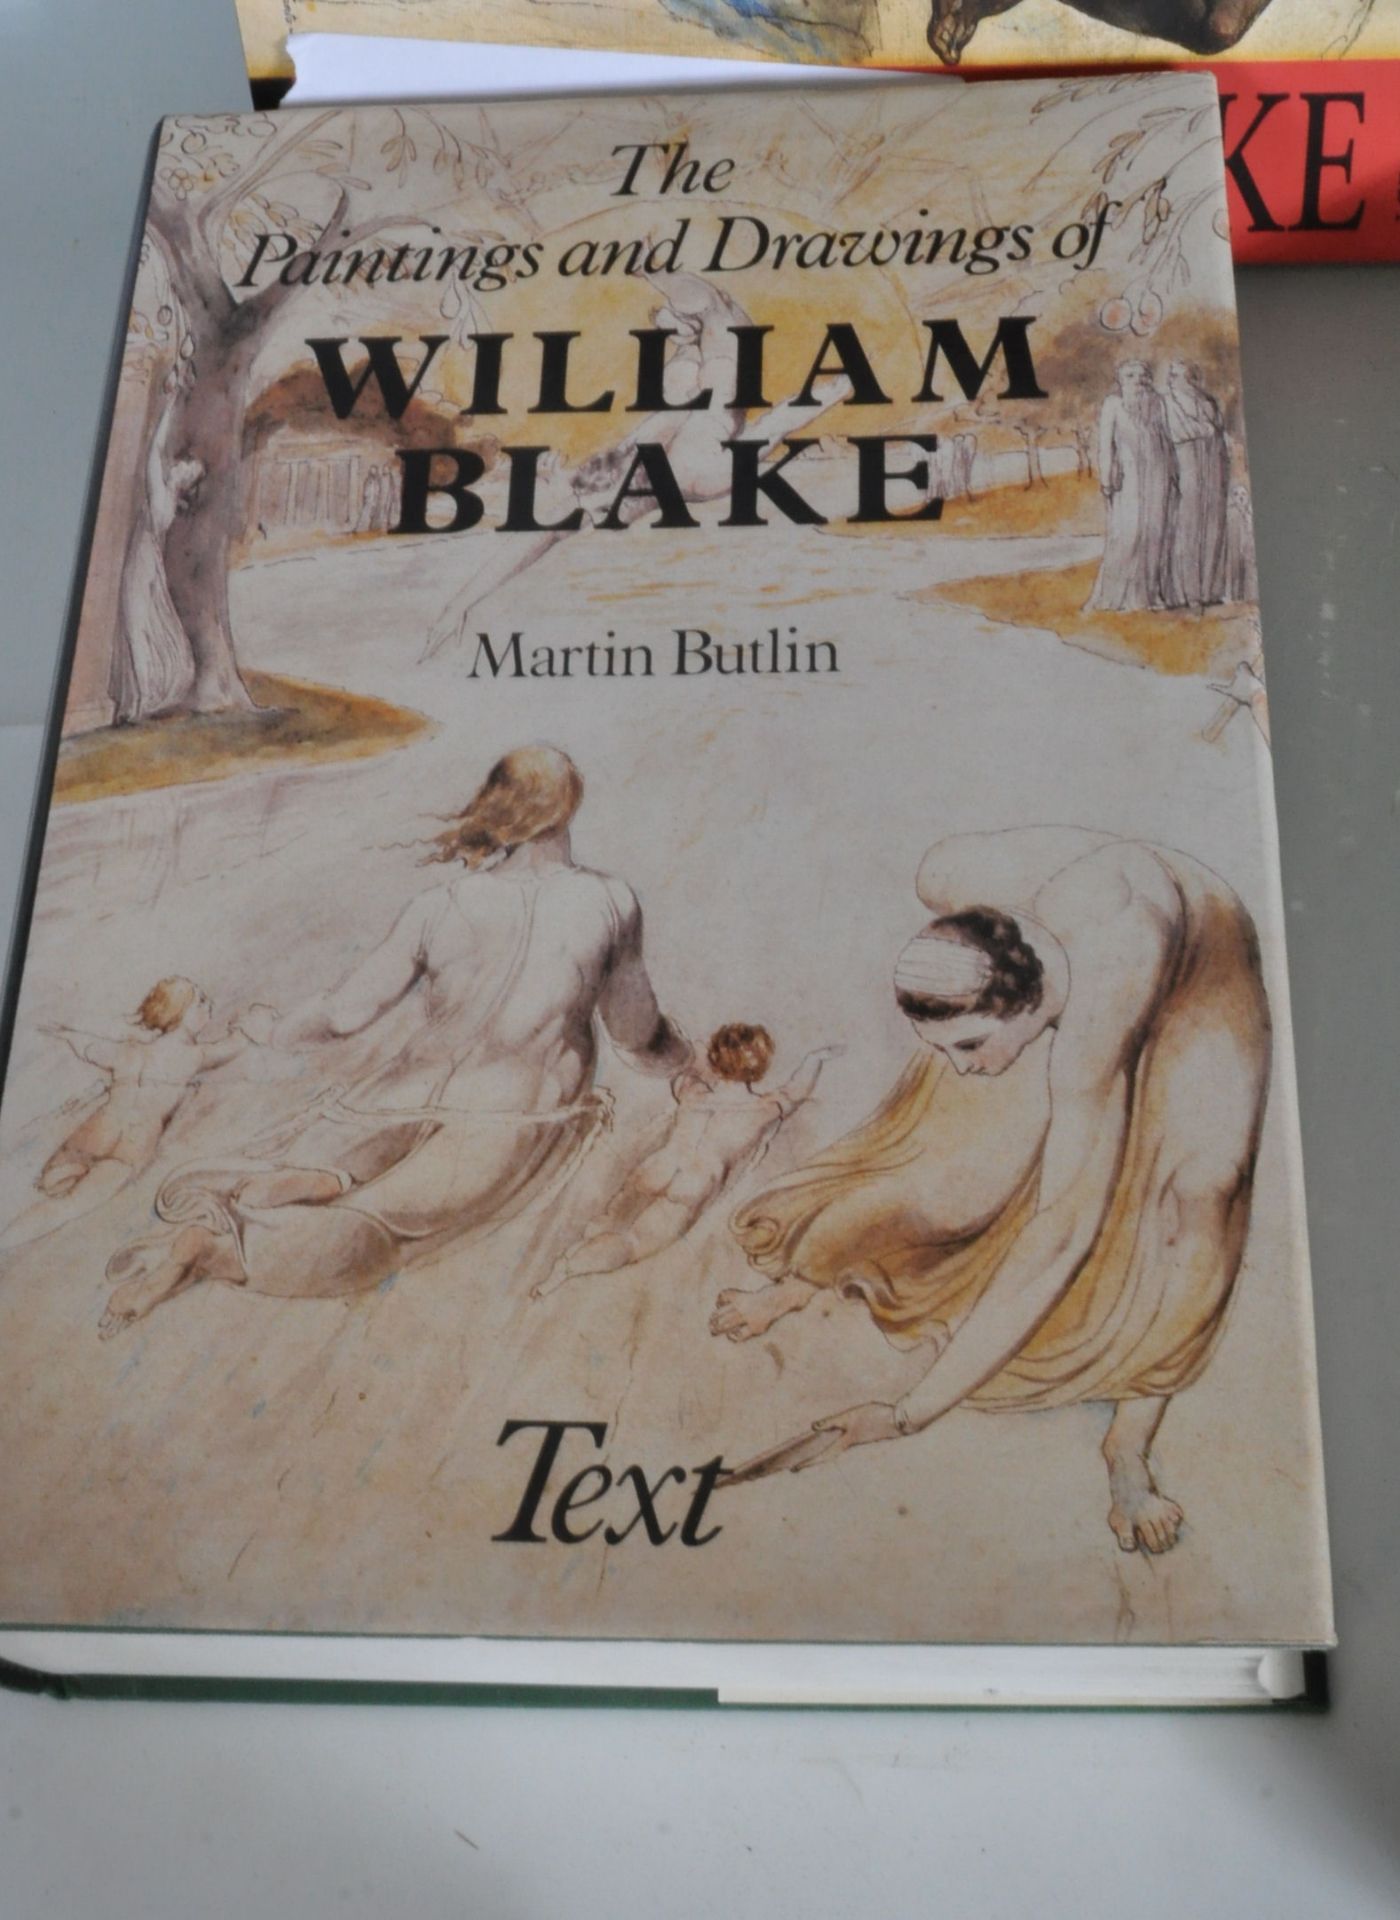 GROUP OF 7 ART REFERENCE FOR WILLIAM BLAKE - Image 7 of 12